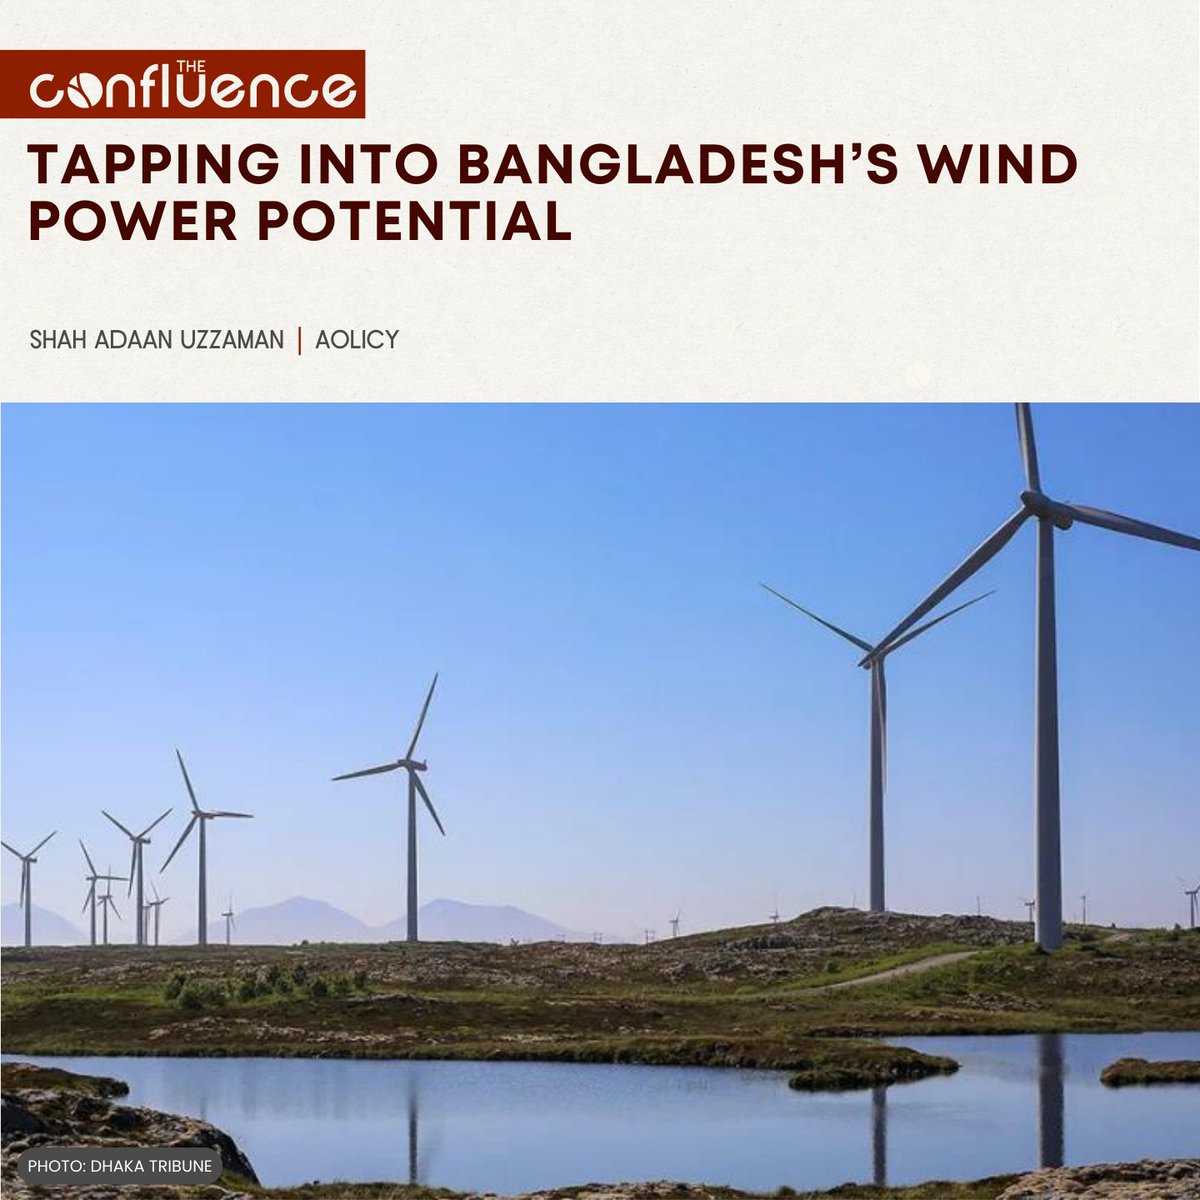 #Bangladesh reached another #RenewableEnergy milestone with the country's first commercial #wind power plant going into full-scale production on March 8. Here's what you need to know about the 60 MW plant set up in #CoxsBazar 👇
theconfluence.blog/tapping-into-b…
#EnergyTransition #BETD